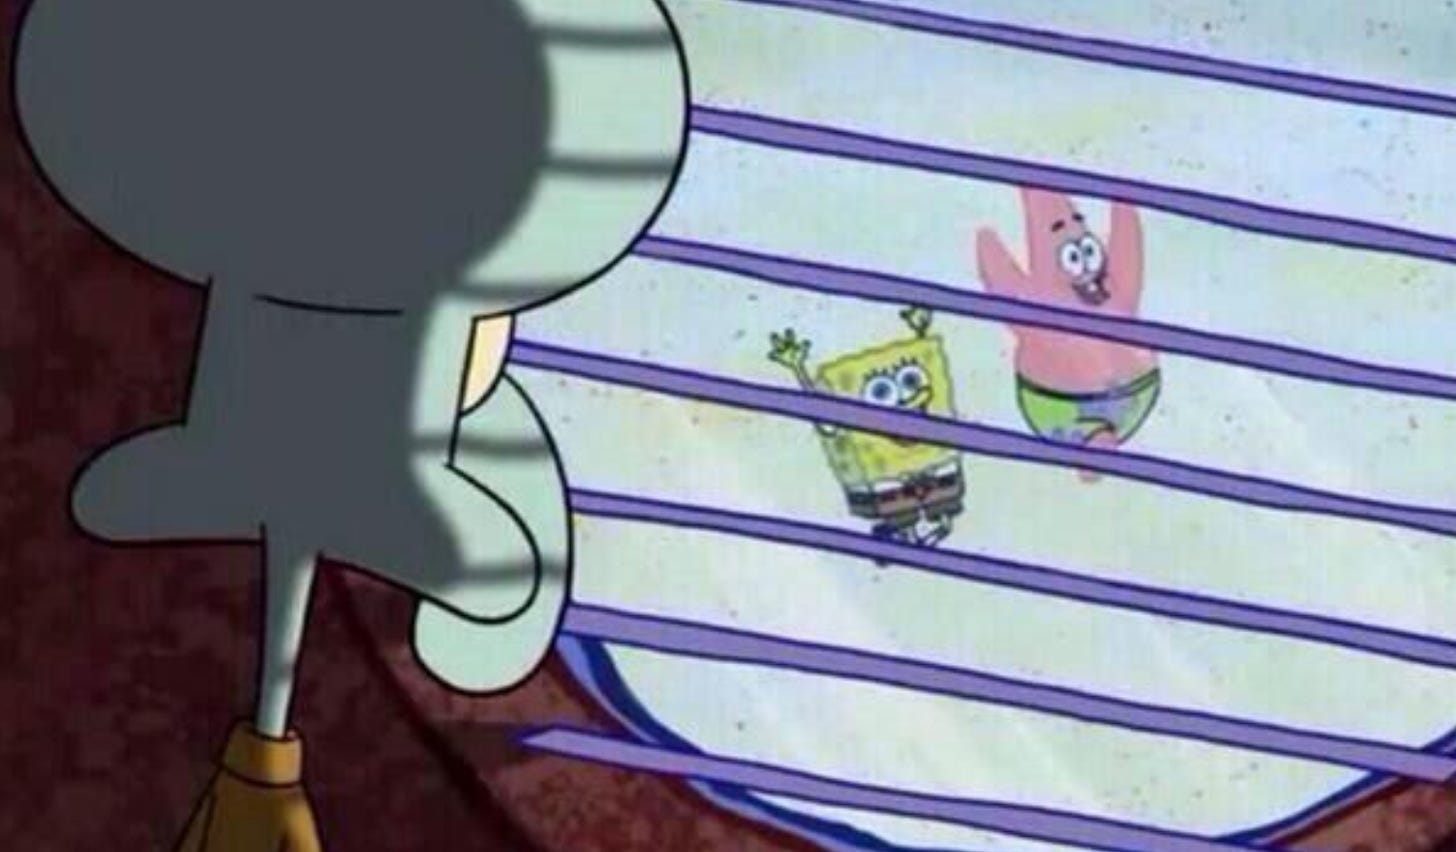 Squidward Looking Out the Window | Know Your Meme